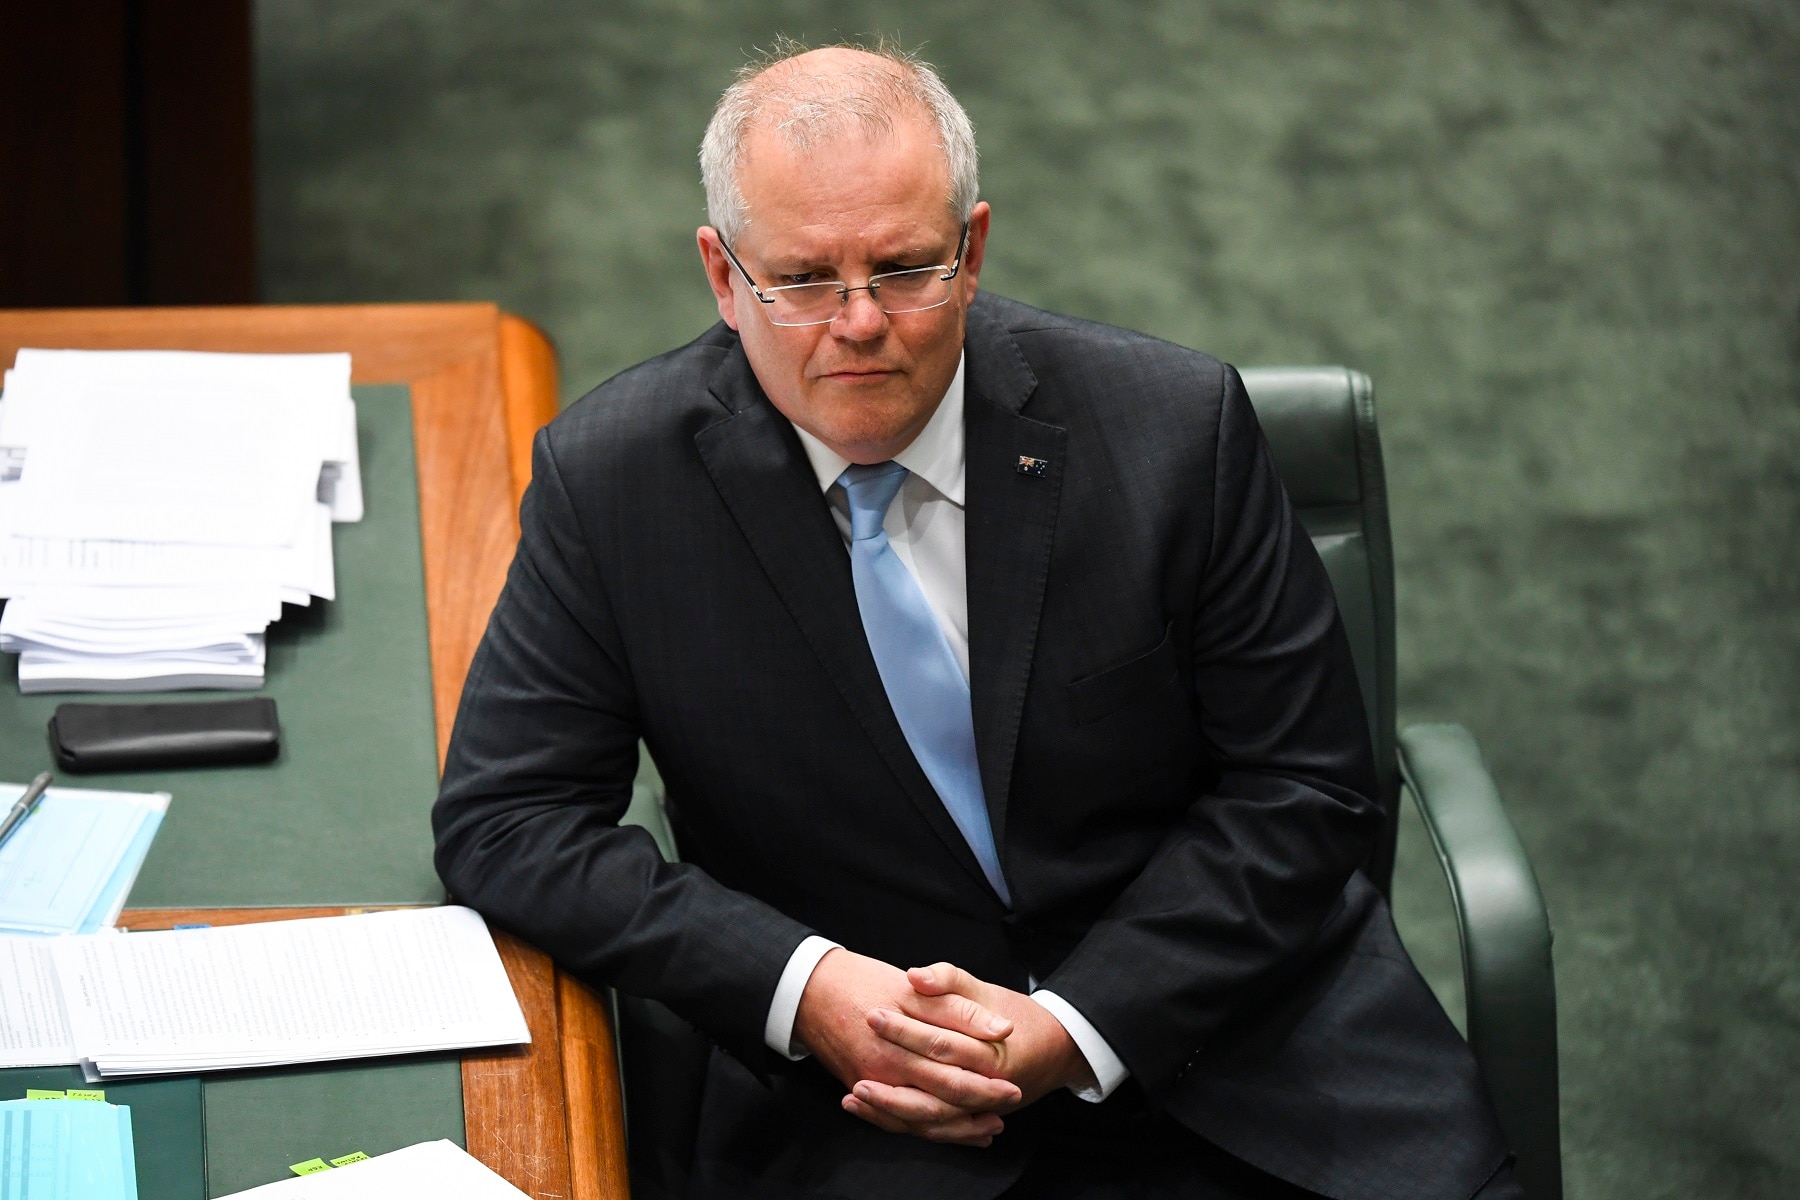 Australian Prime Minister Scott Morrison reacts during House of Representatives Question Time at Parliament House in Canberra, Wednesday, April 8, 2020. (AAP Image/Lukas Coch) NO ARCHIVING